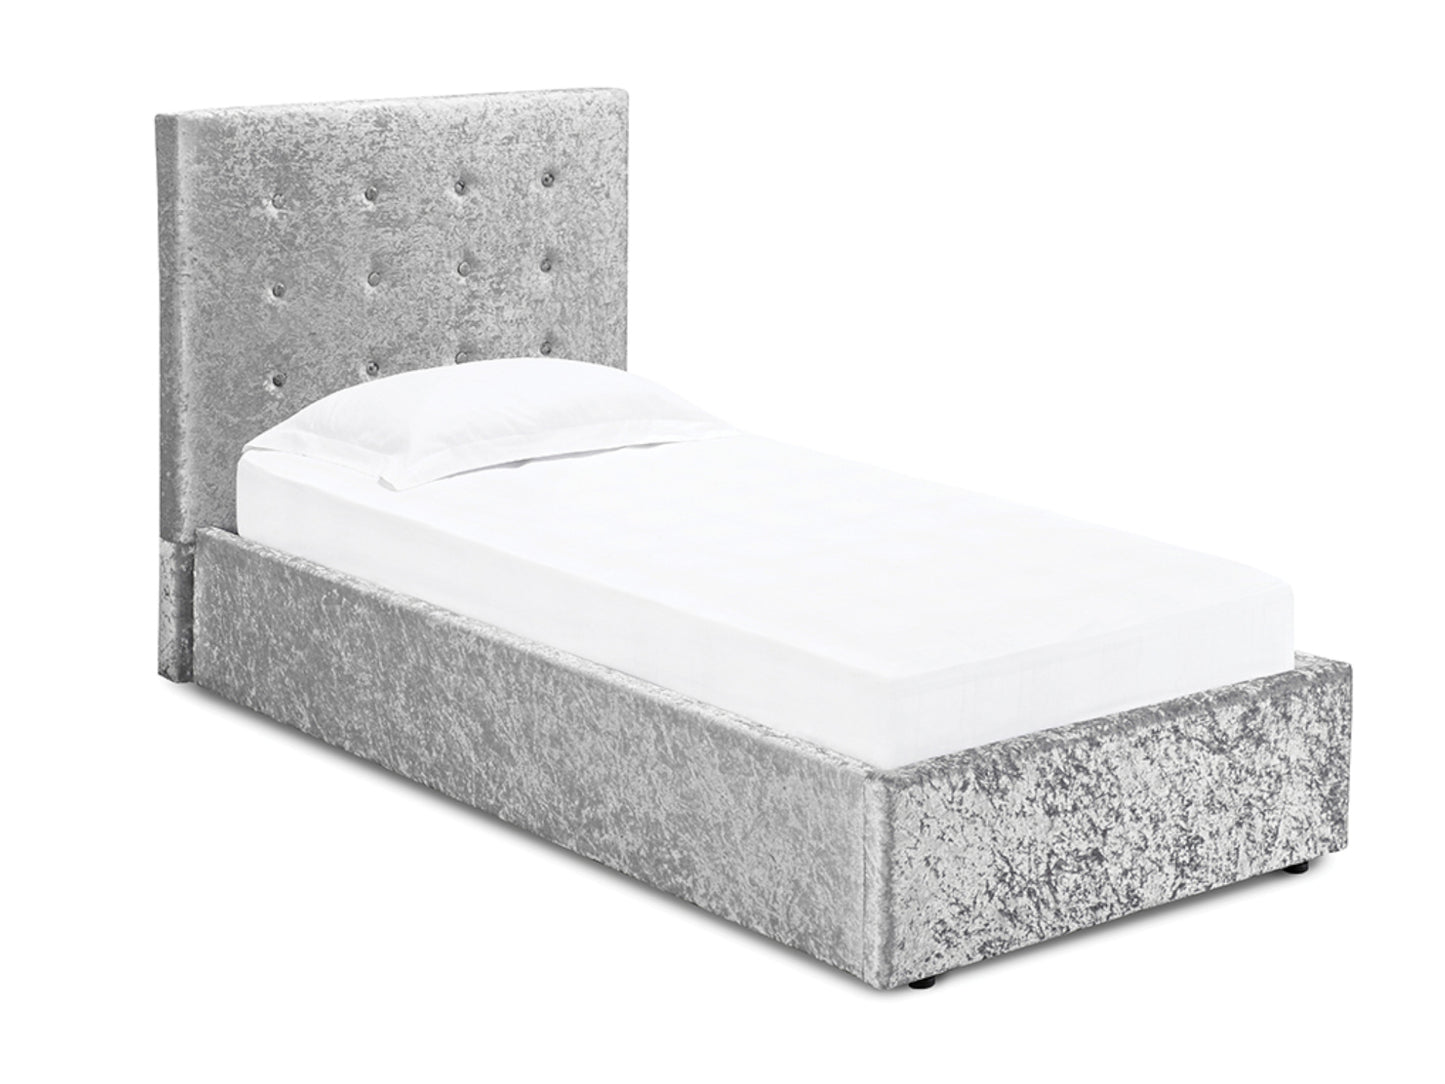 Rimini Ottoman Storage Bed Frame in Crushed Silver